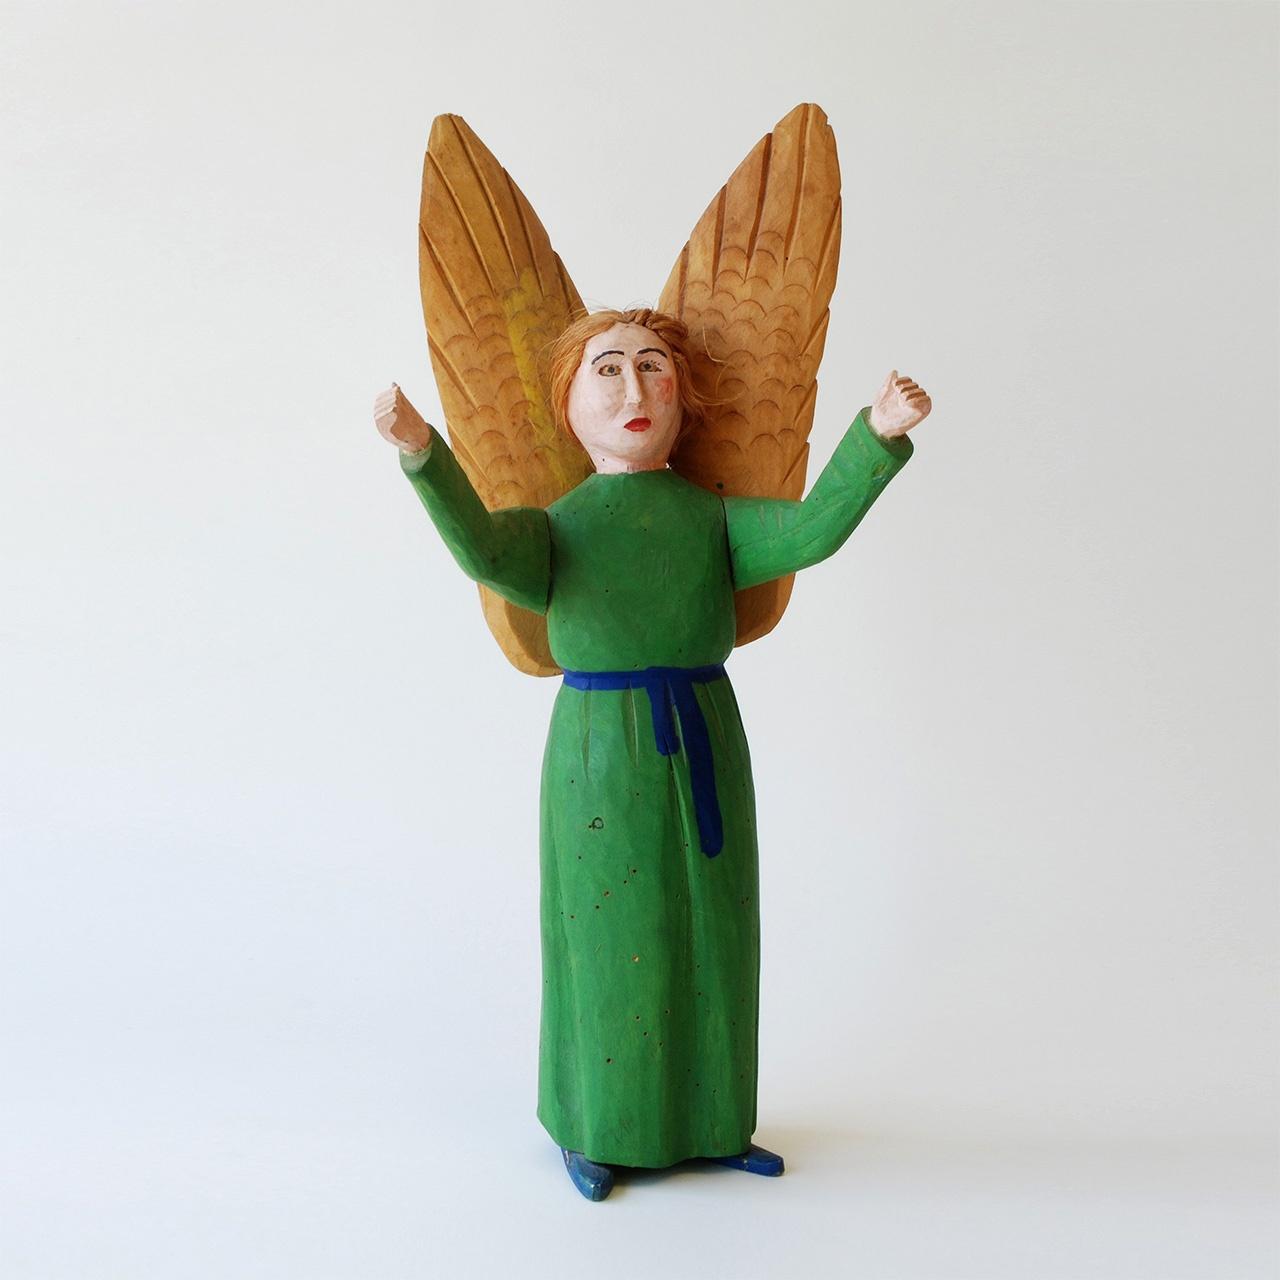 Objects, Borders and Neighbors, Manuel Jimenez, "Angel"	wood, paint, Early 1970s, Jim and Veralee Bassler Collection